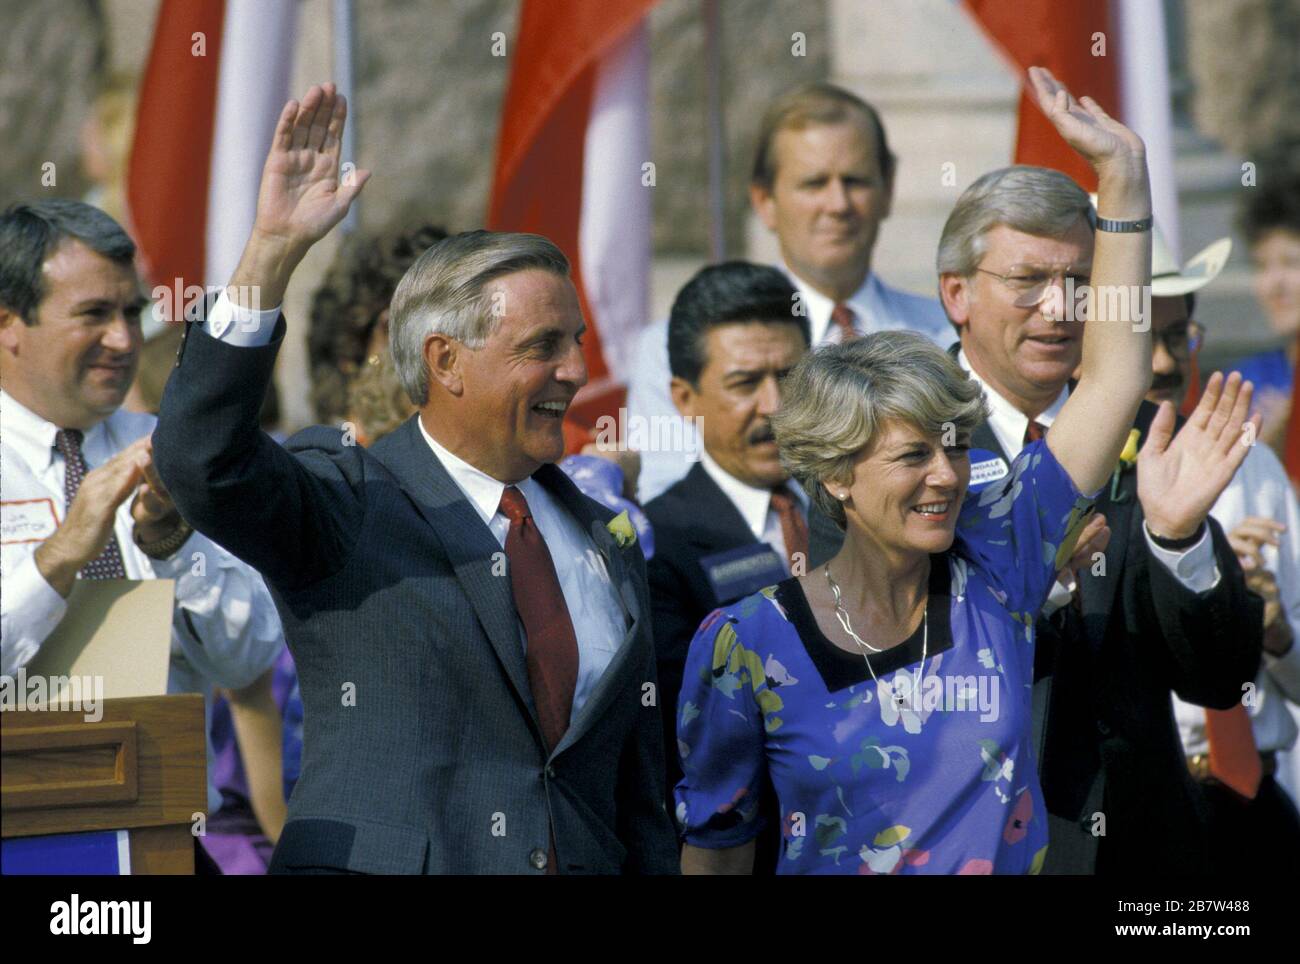 Austin, Texas USA, 1984: Democratic presidential candidate Walter Mondale and his vice presidential pick Geraldine Ferraro wave to an enthusiastic crowd during a rally at the Texas Capitol. Ferraro is the first woman nominated to a major party presidential ticket. Texas Gov. Mark White is on the far right. ©Bob Daemmrich Stock Photo